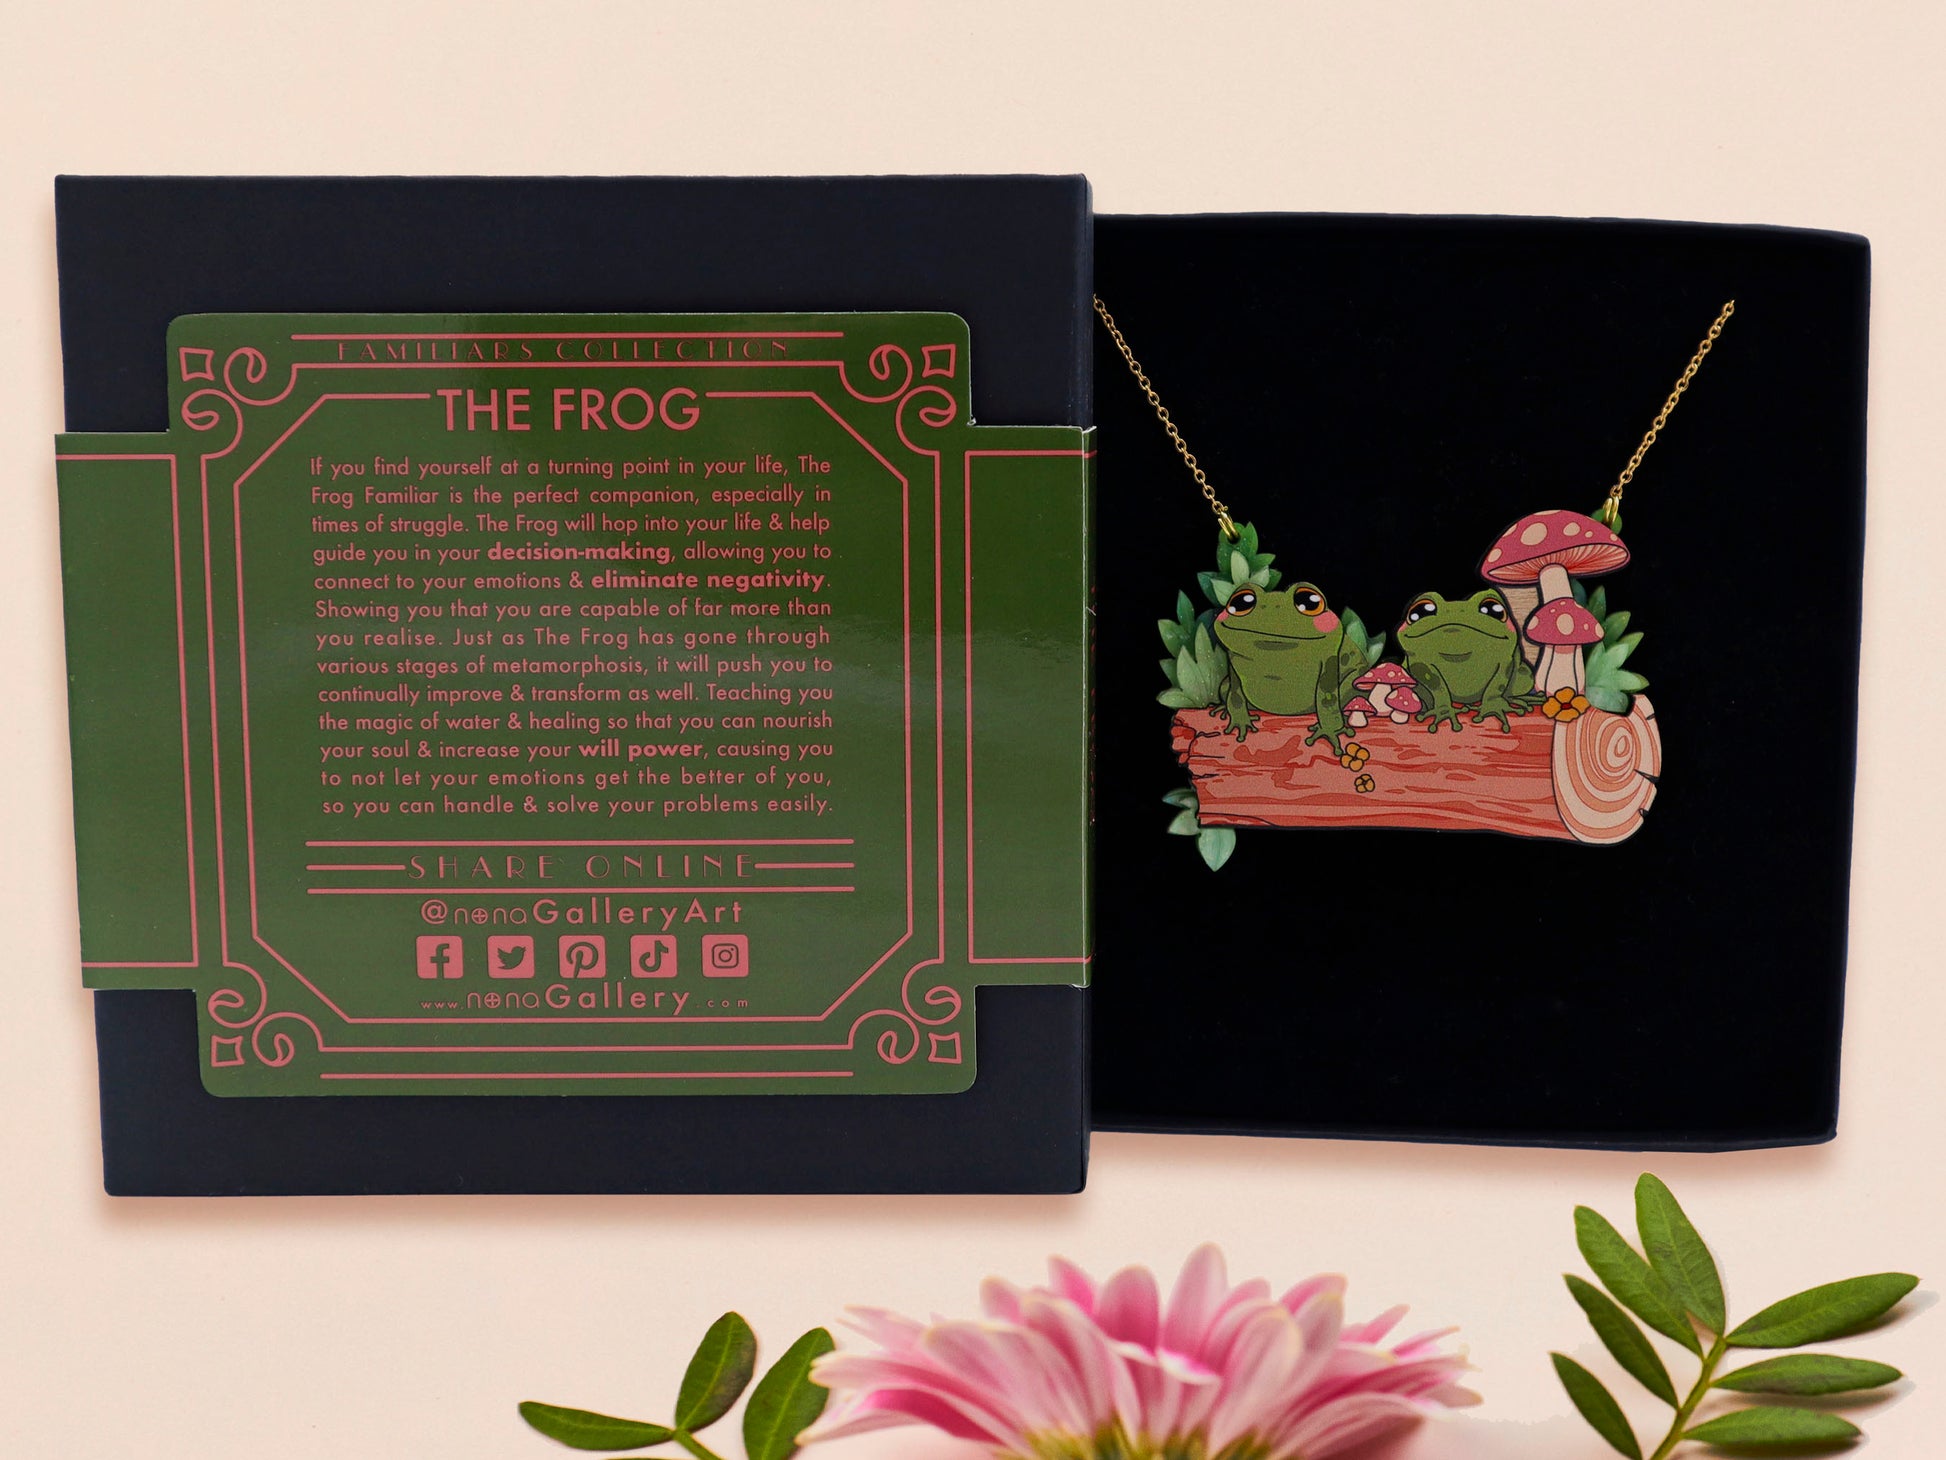 A wooden and glitter acrylic necklace with gold chain in a black box of two cute frogs sat on a log smiling surrounded by flowers, plants and mushrooms